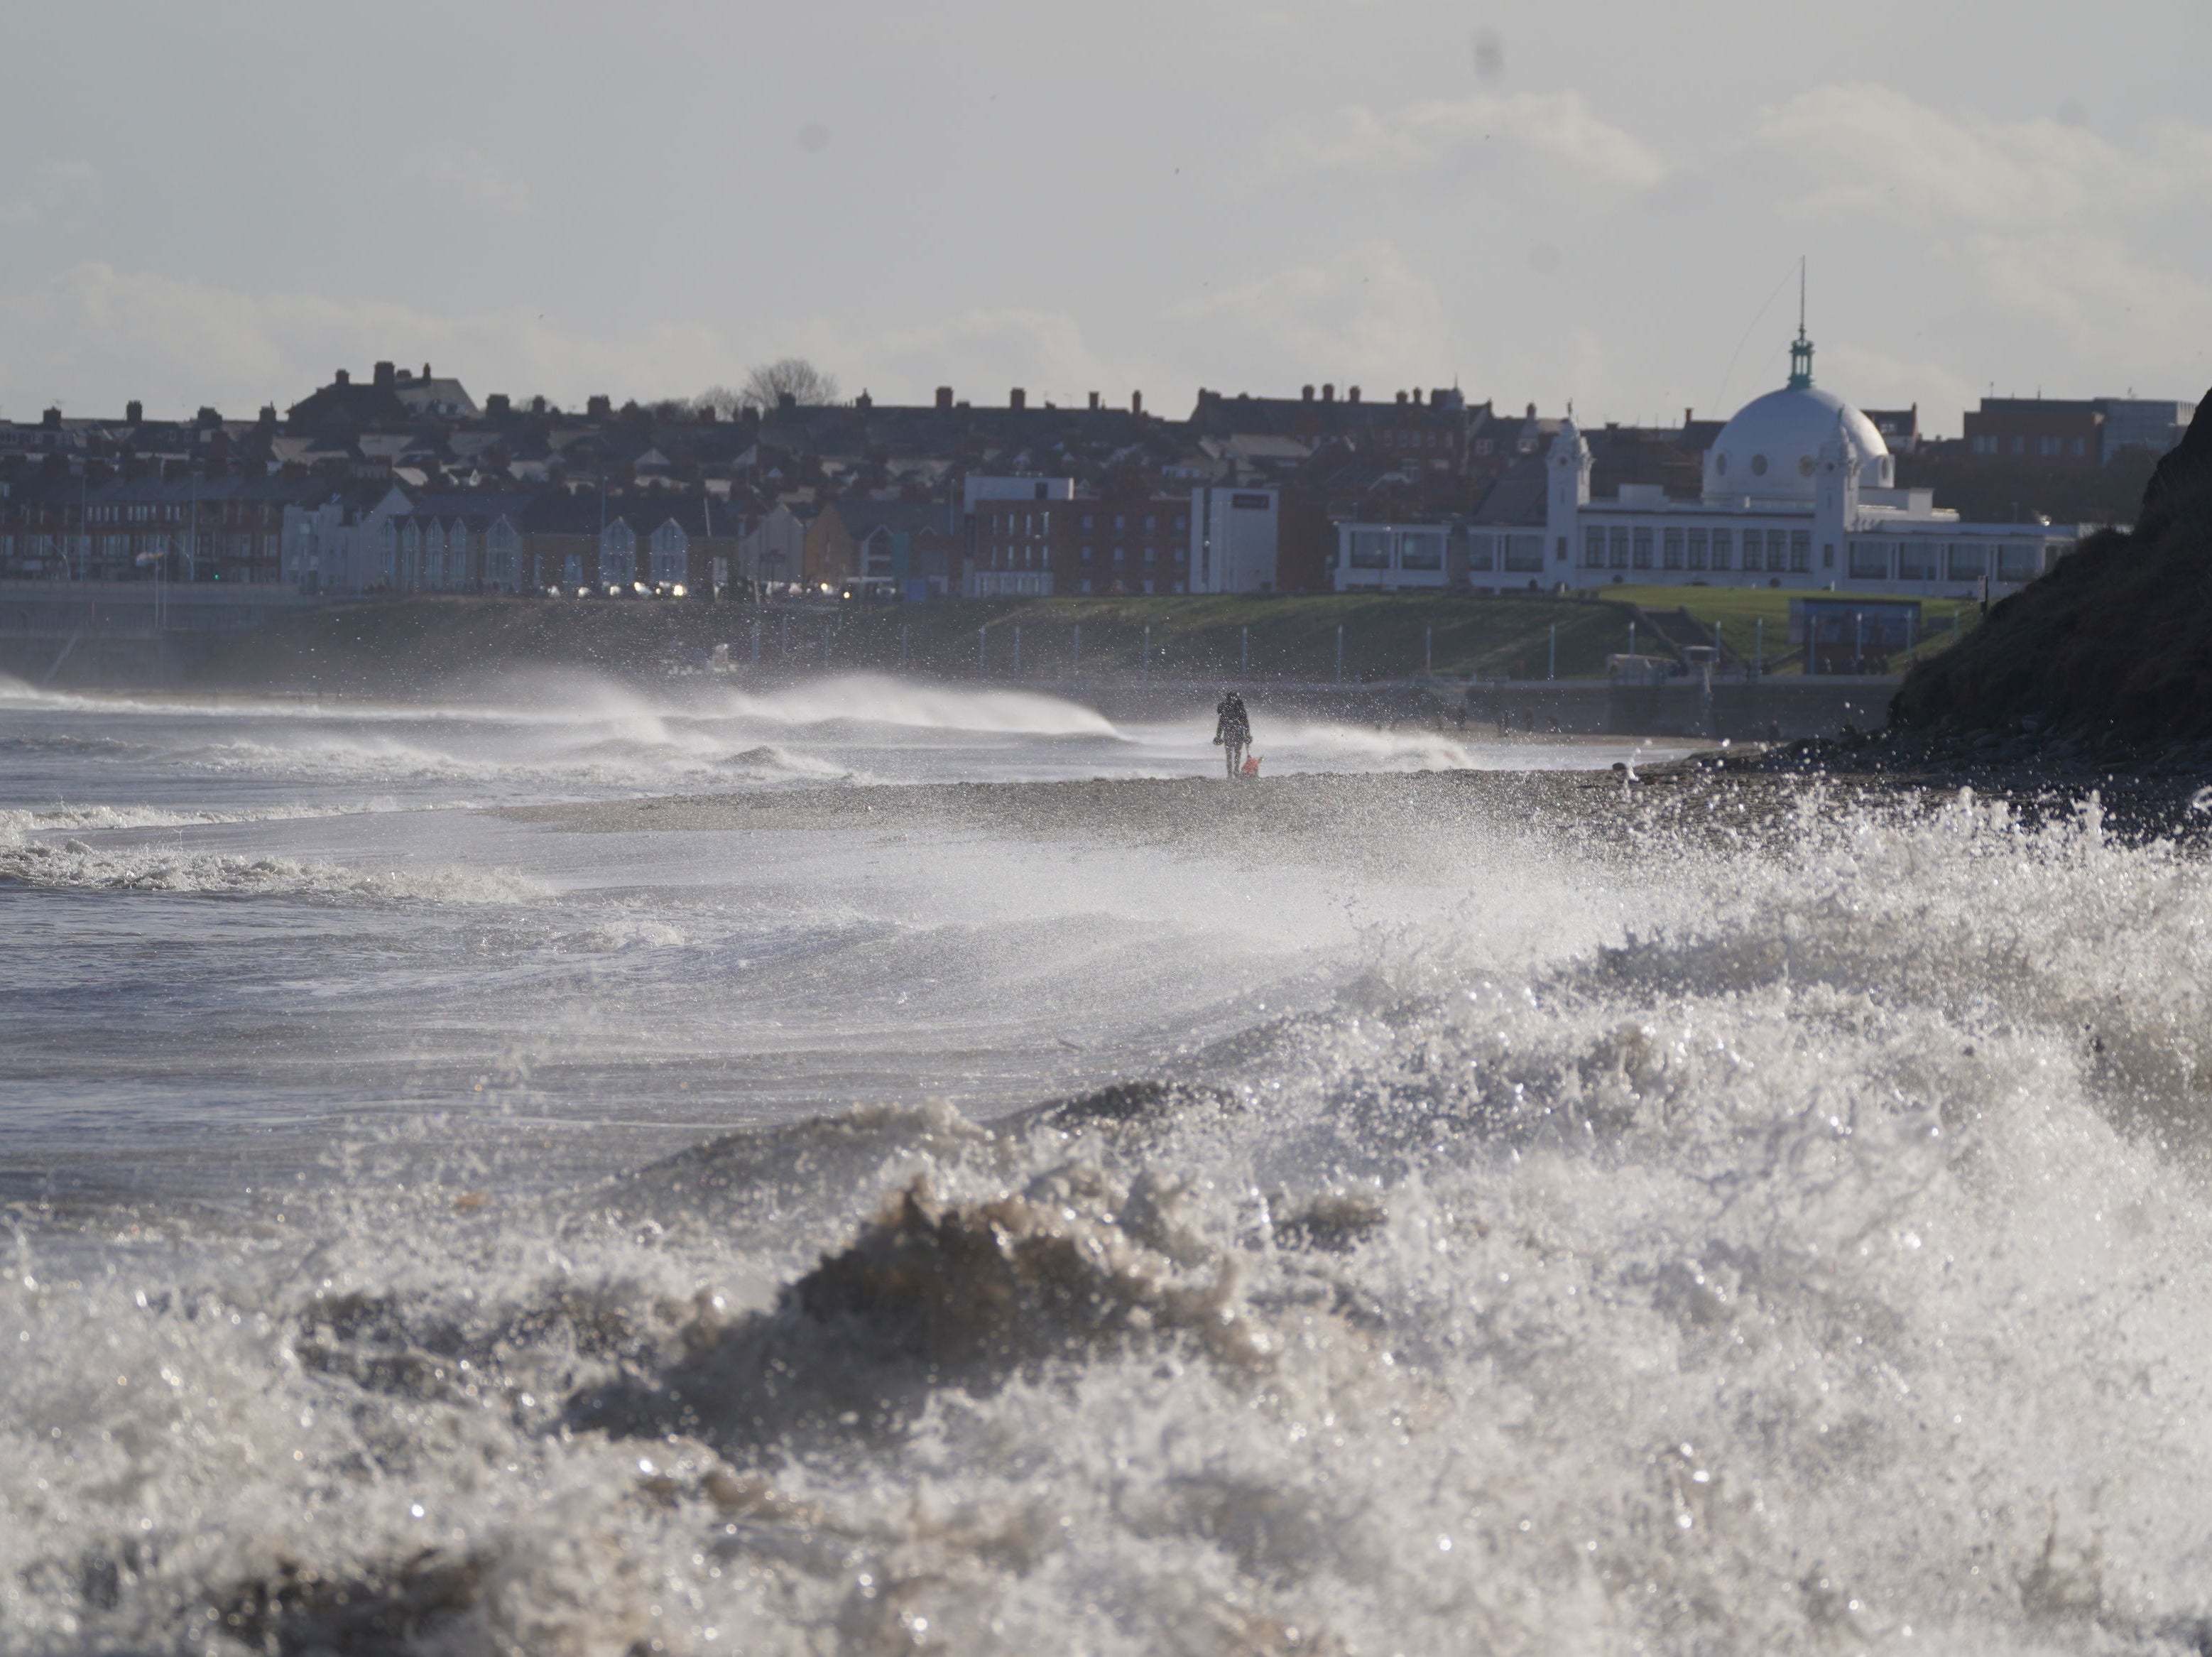 A dog walker on Whitley bay beach as big waves hit the shoreline on 15 February 2022